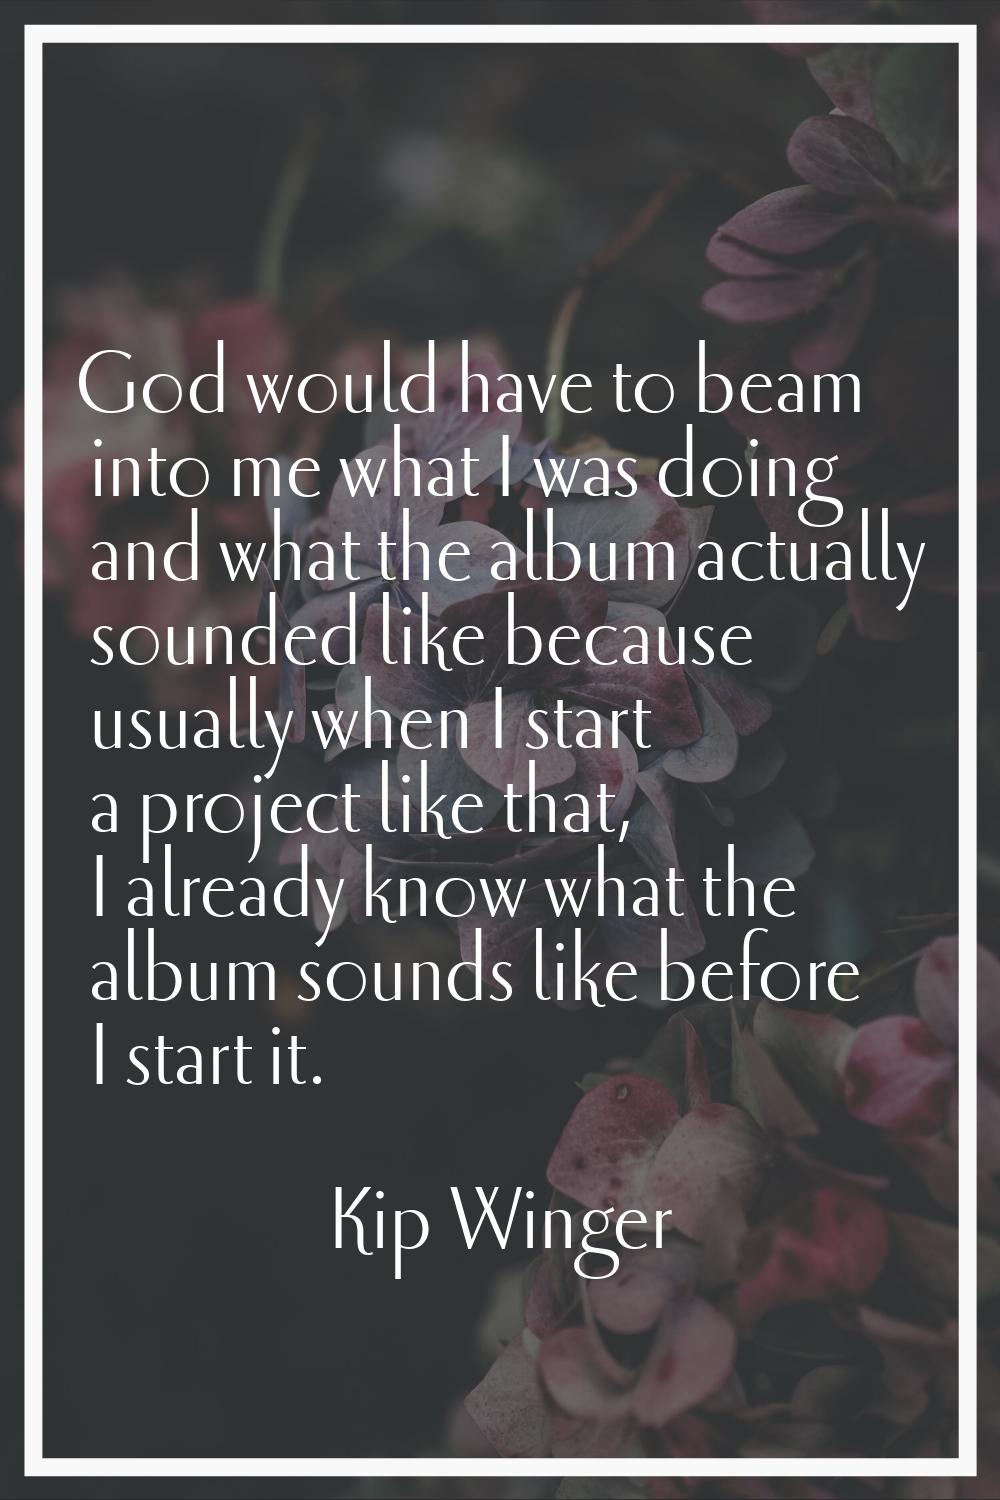 God would have to beam into me what I was doing and what the album actually sounded like because us